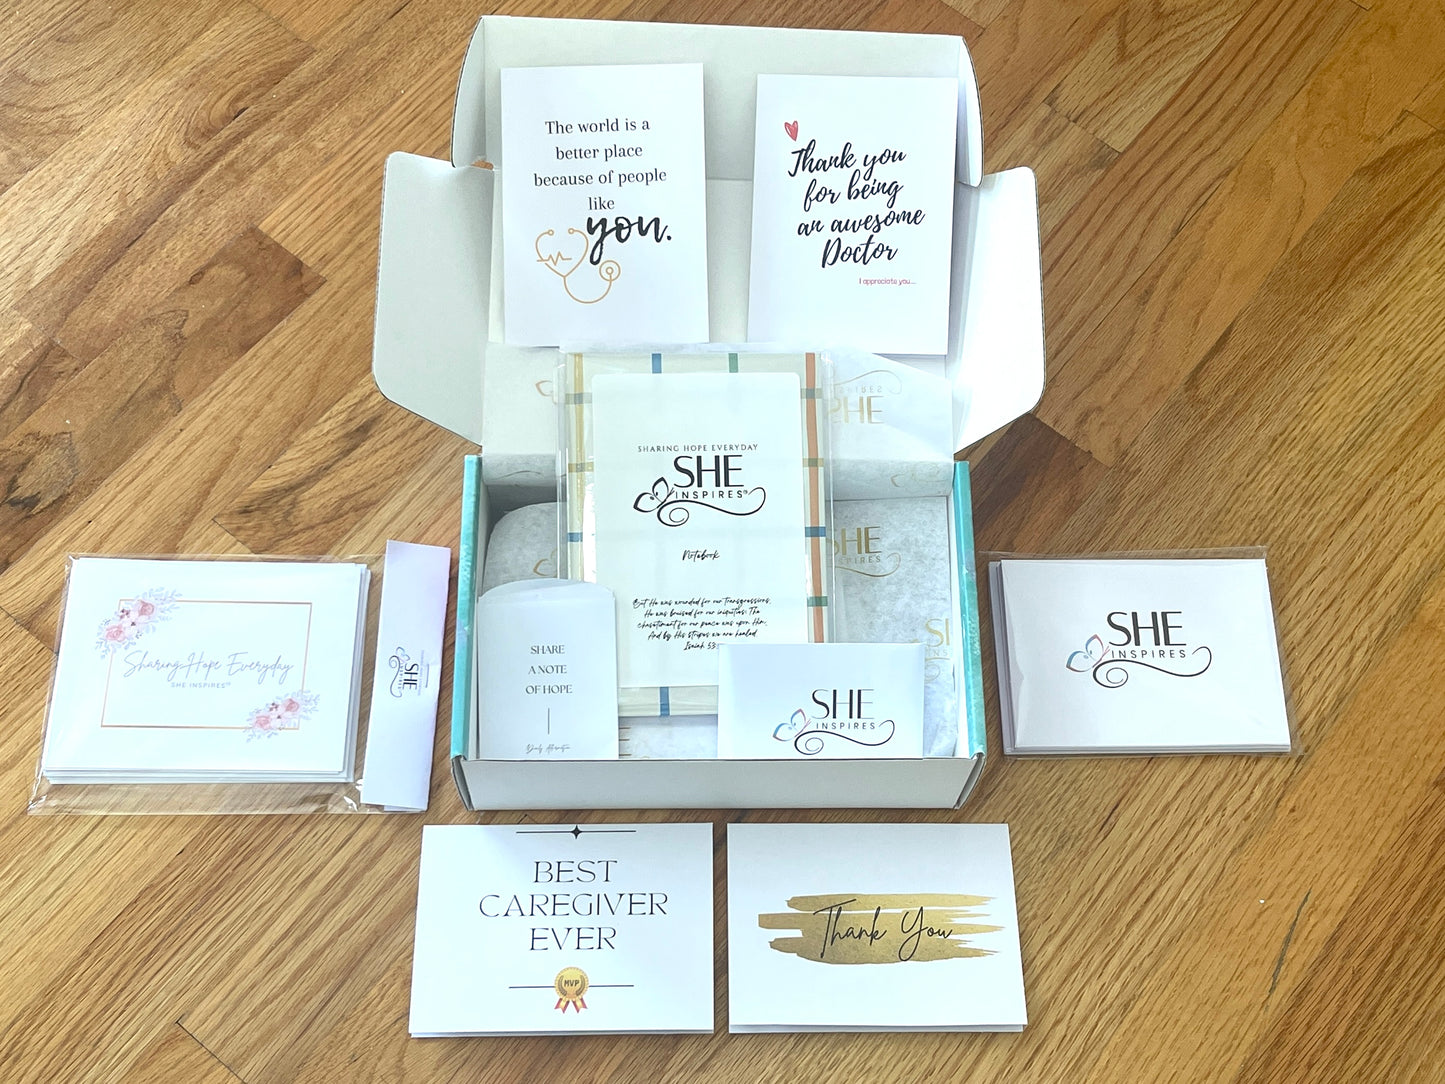 Encouragement In A Box, Cancer Gift Box For Women, Cancer Care Box, Chemo  Care Box, Cancer Gift For Women